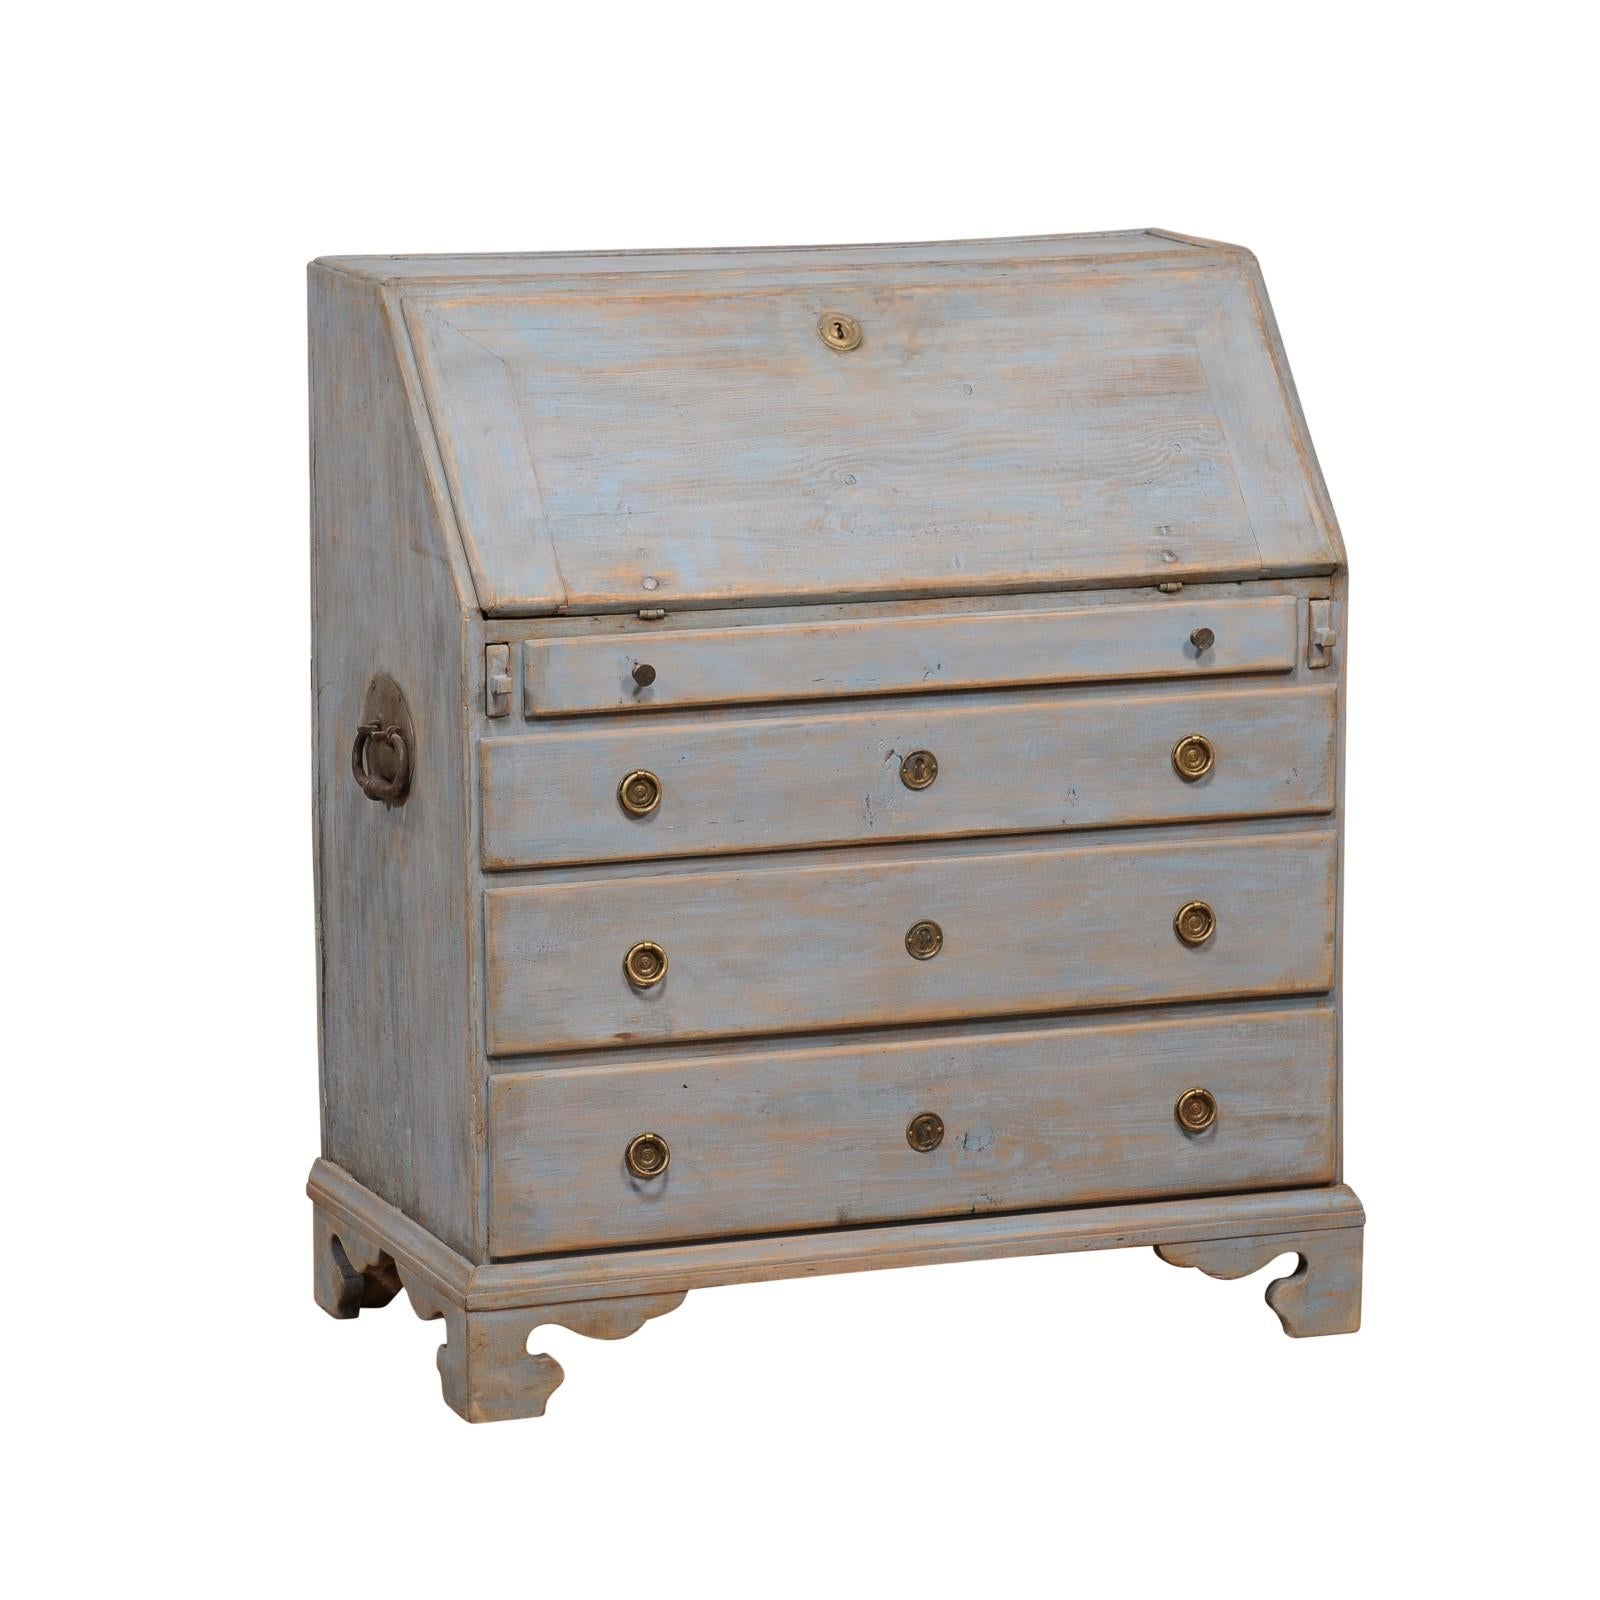 A Swedish late Gustavian period painted wood slant-front secretary from the early 19th century with light blue painted finish and carved bracket feet. This exquisite Swedish late Gustavian period painted wood slant-front secretary, dating back to